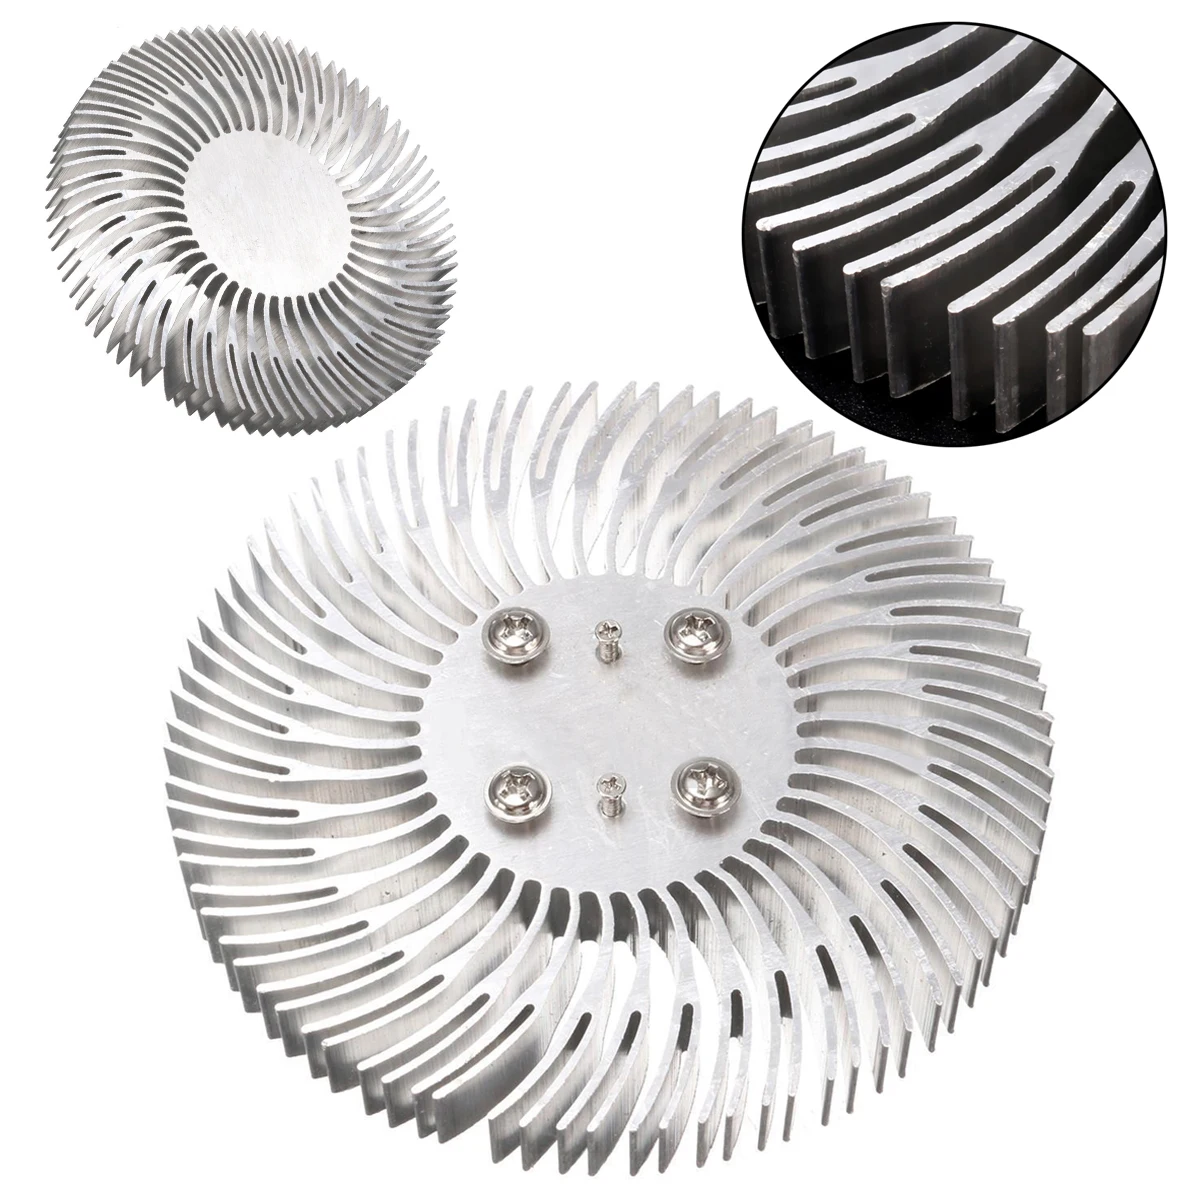 1pc Round Spiral Aluminum Heat Sink Radiator 90*10mm With 6pcs Screws For 10W High Power LED Lamp Heat Dissipation Mayitr